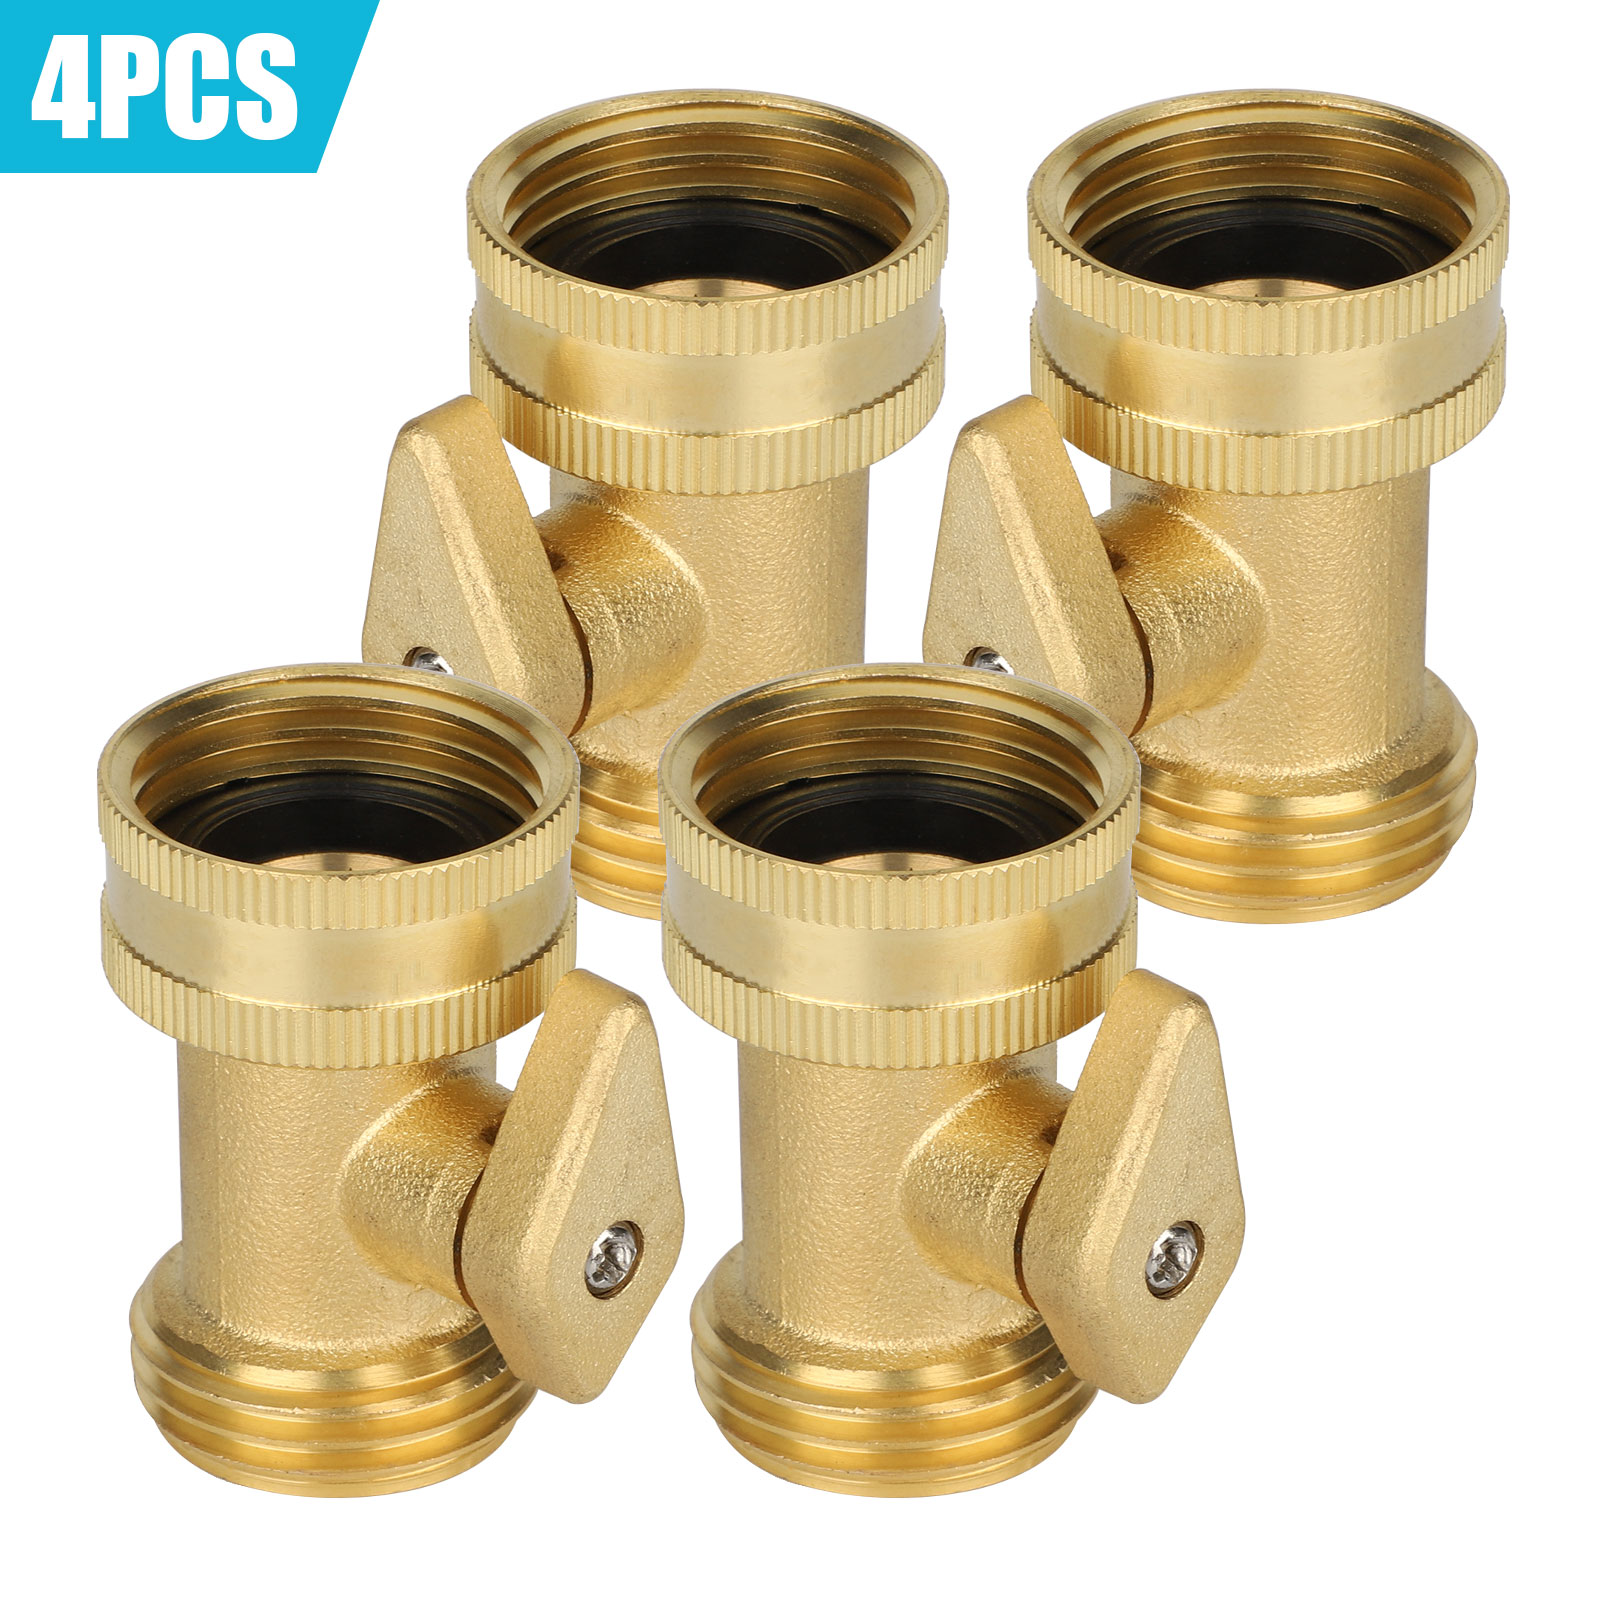 2/4PCS Brass Garden Nozzle Hose Connector Shut off Water Pipe Solid Valves Tools 